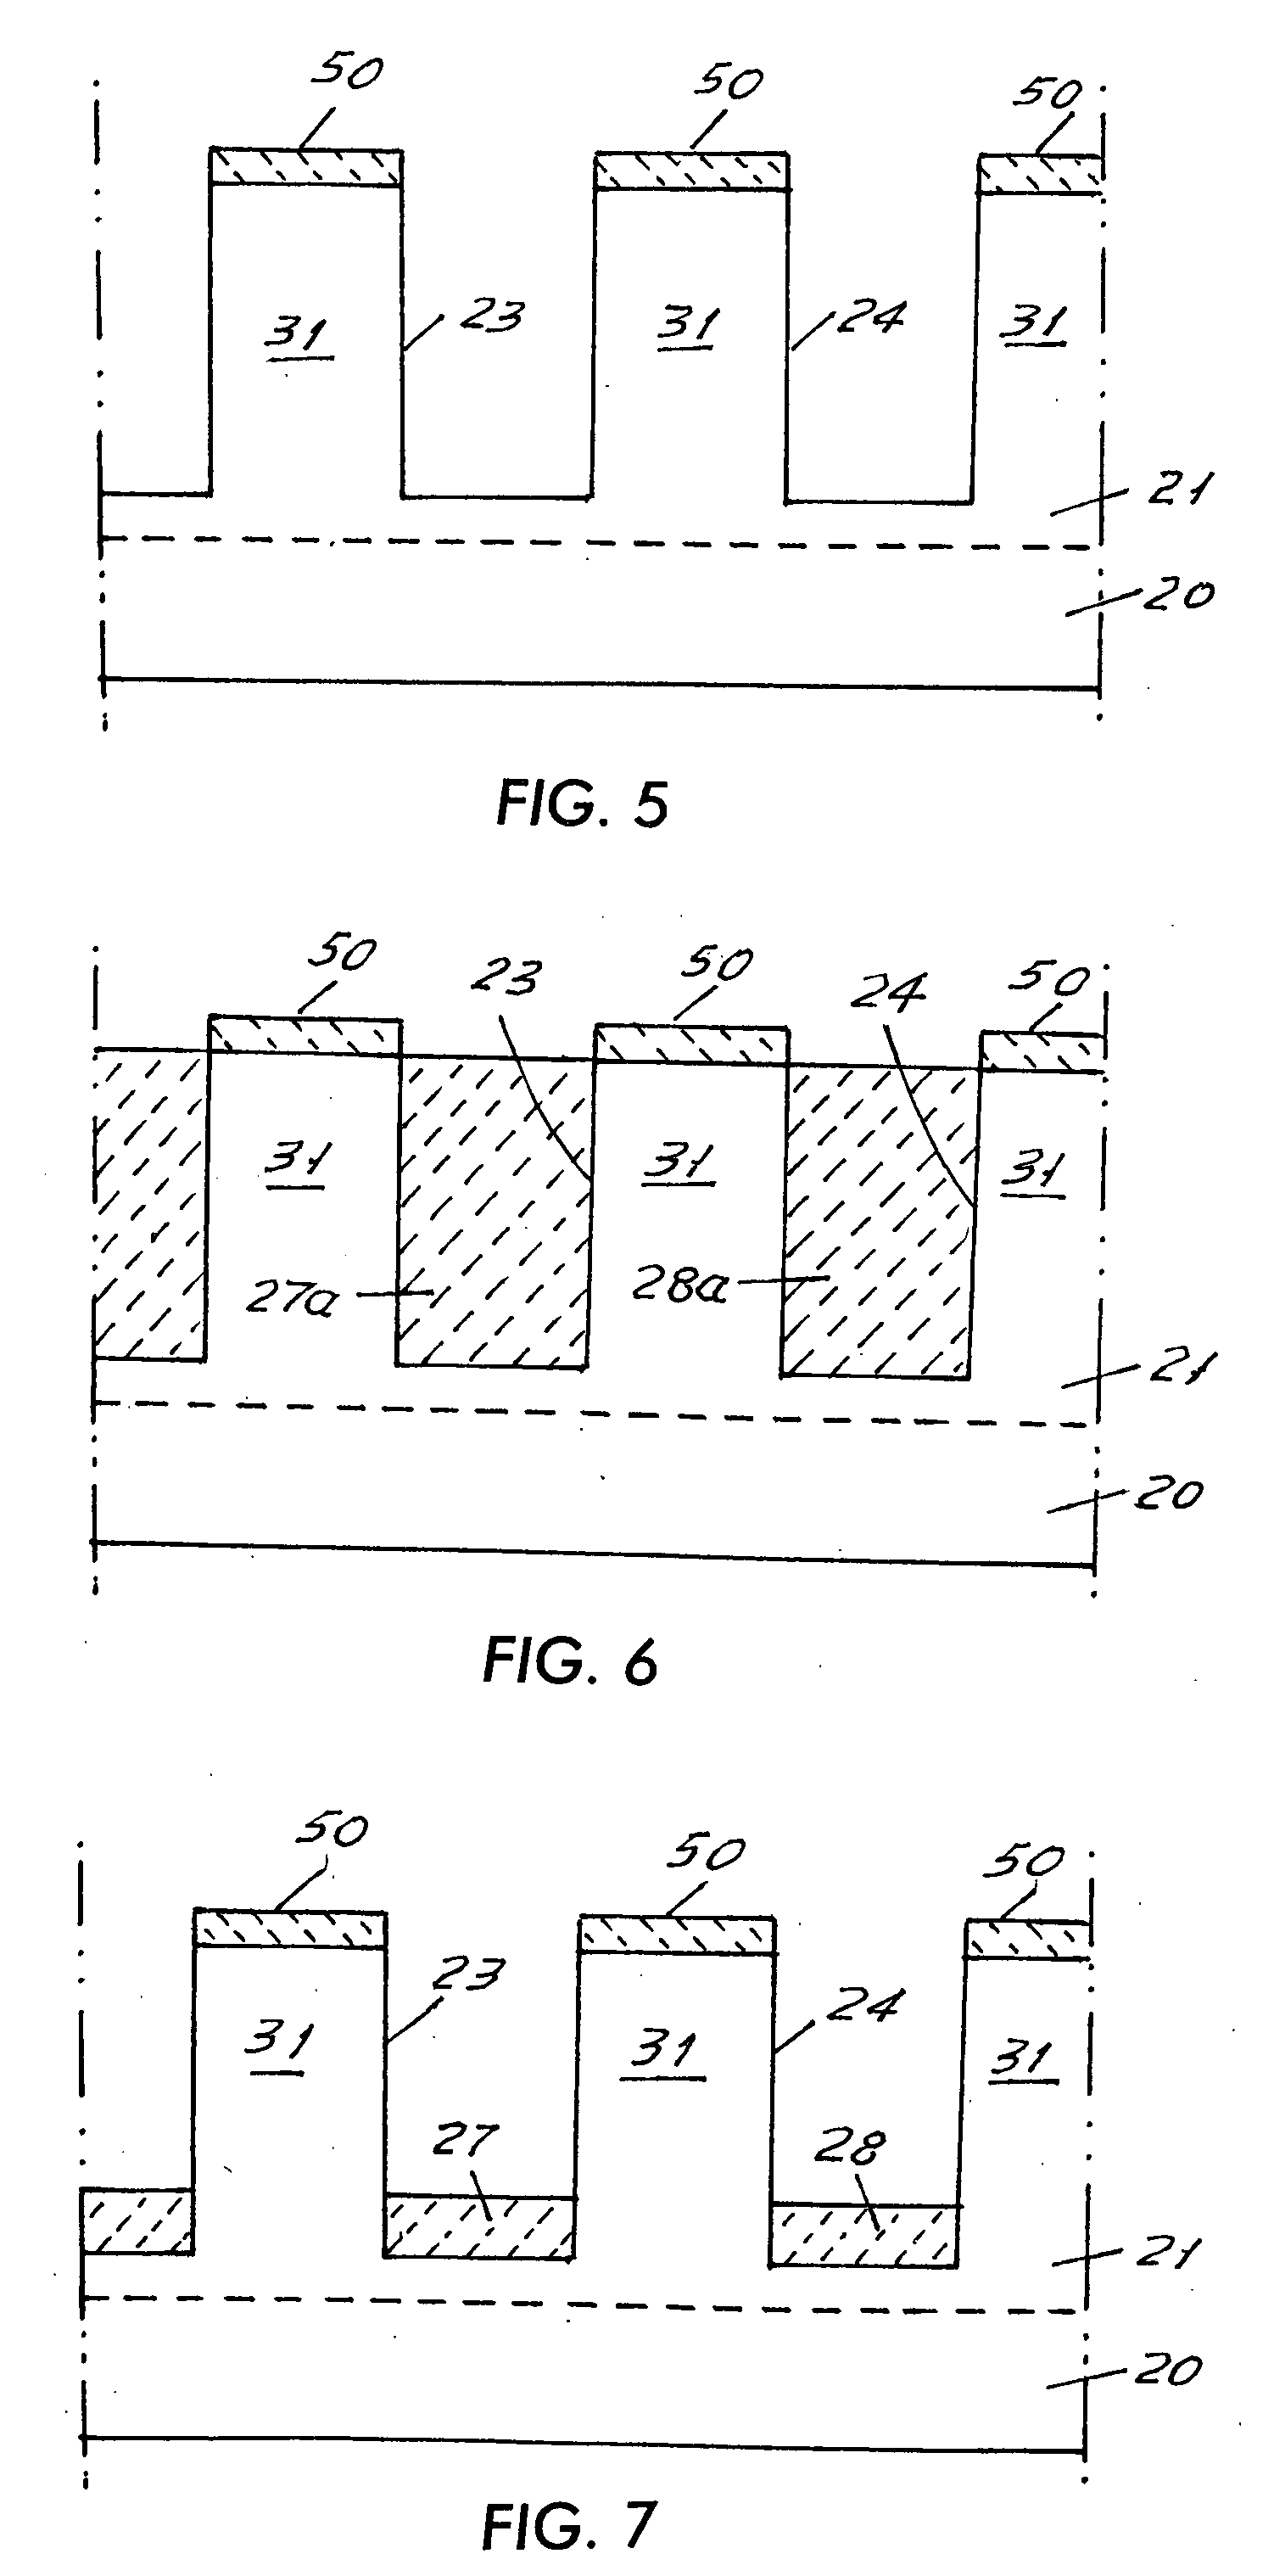 Trench type schottky rectifier with oxide mass in trench bottom